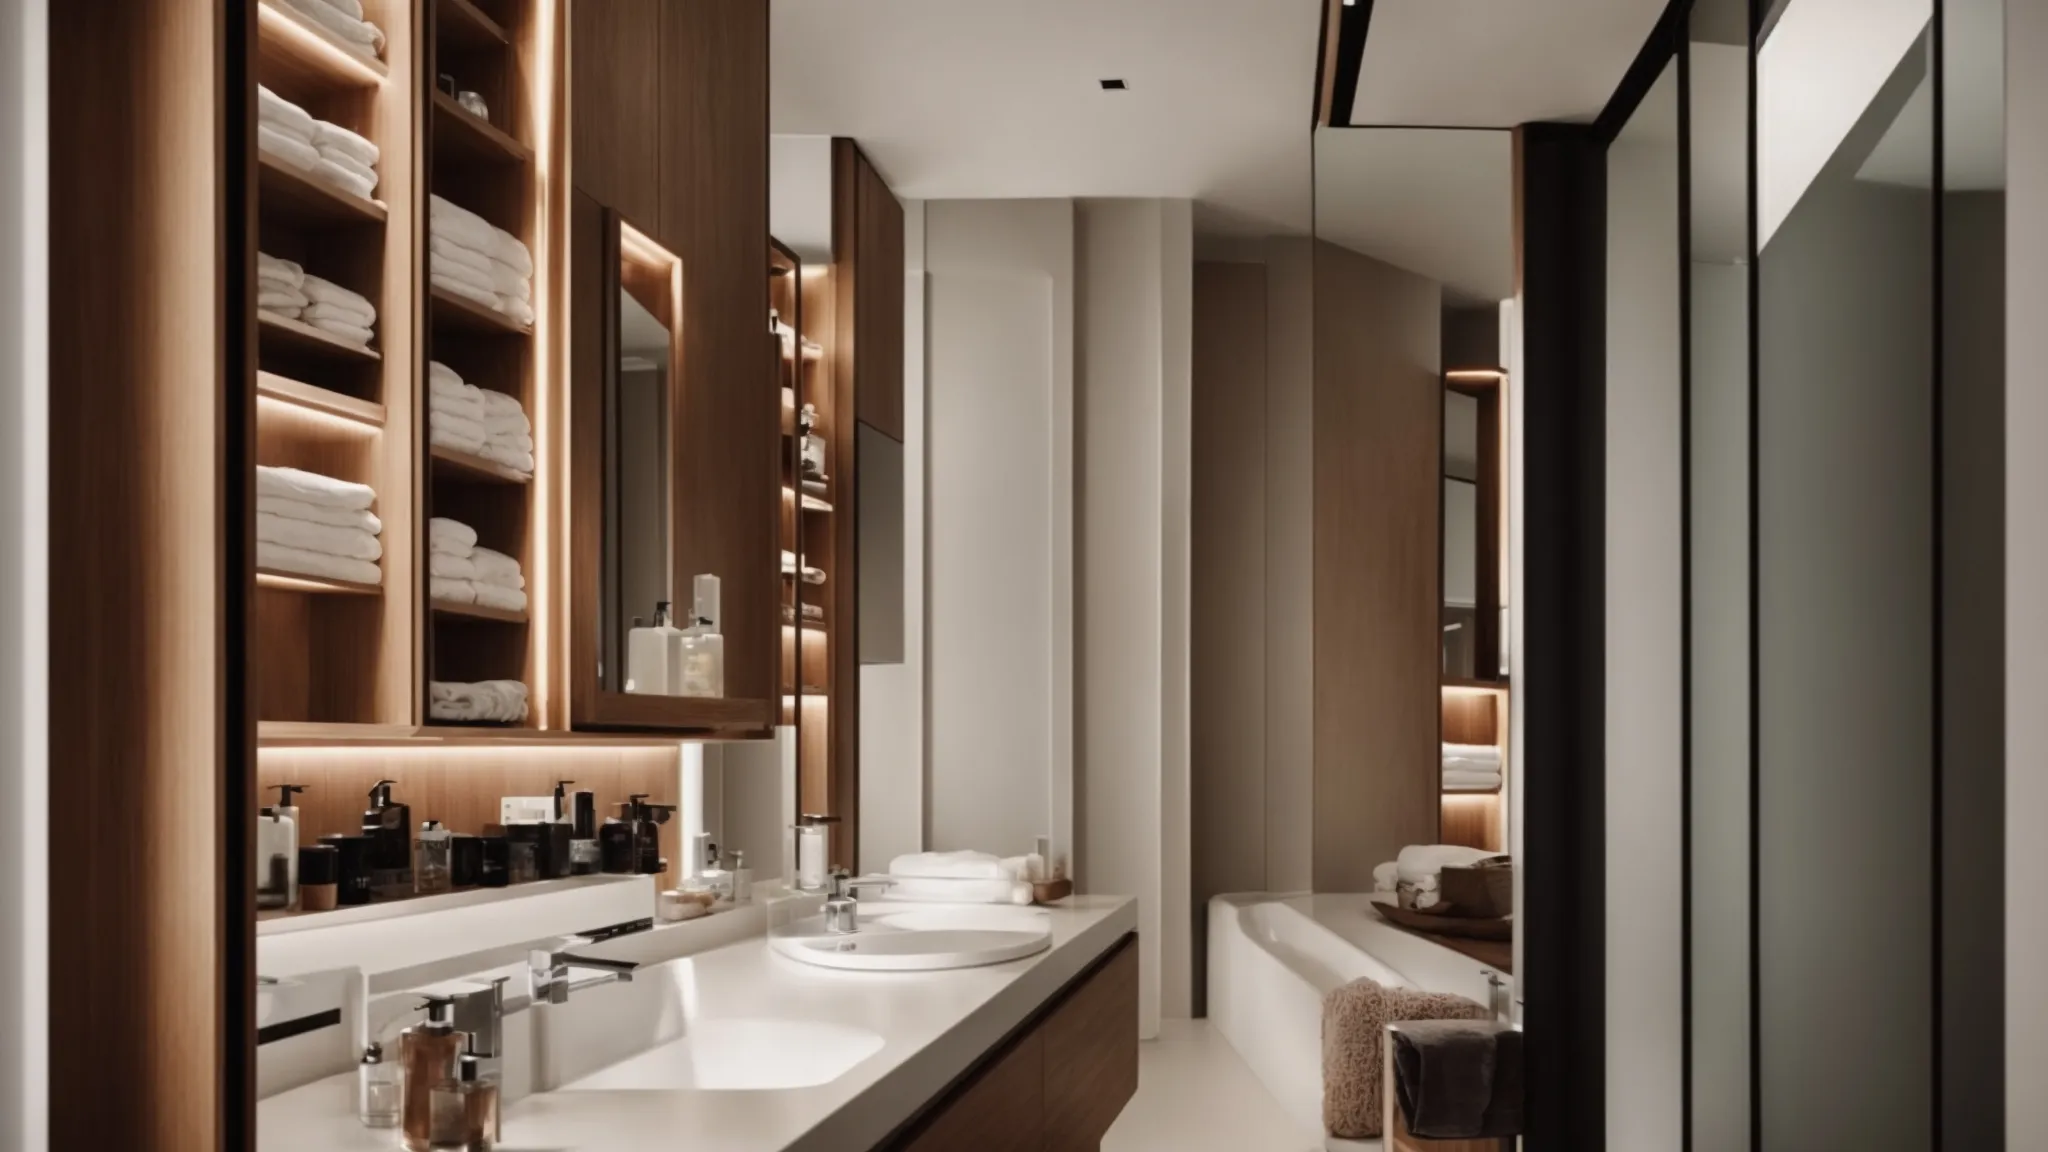 a compact bathroom with tall, narrow shelving and mirrors positioned to amplify light and space.